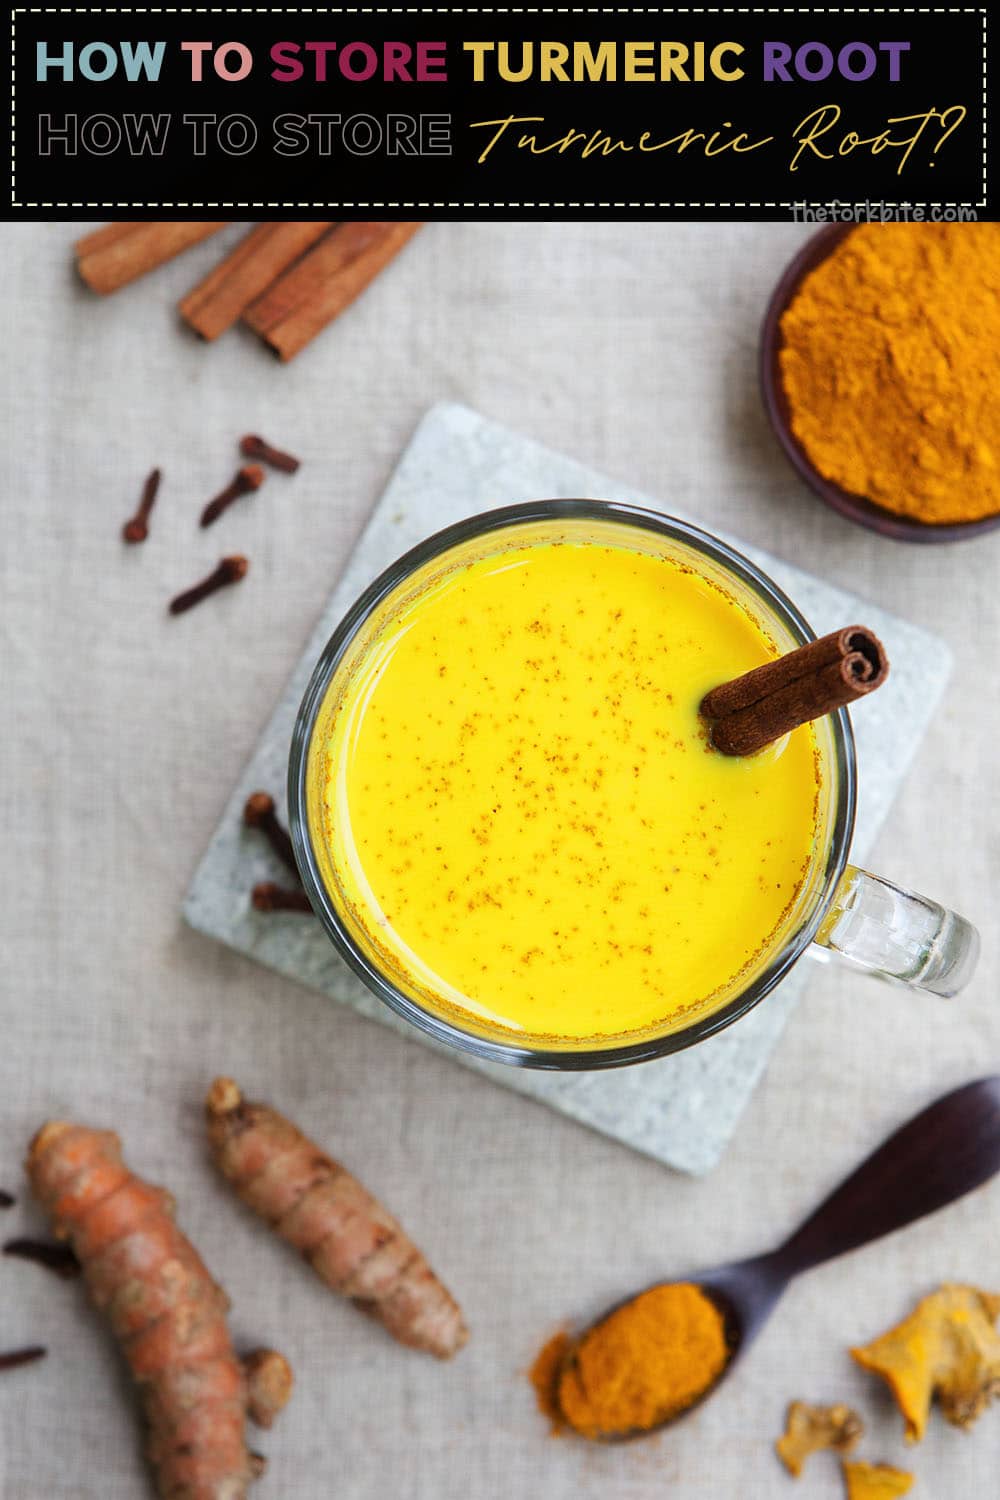 Before you store fresh turmeric, you need to get rid of any dirt with a small brush. Wherever it came from cleaning before storing is essential.